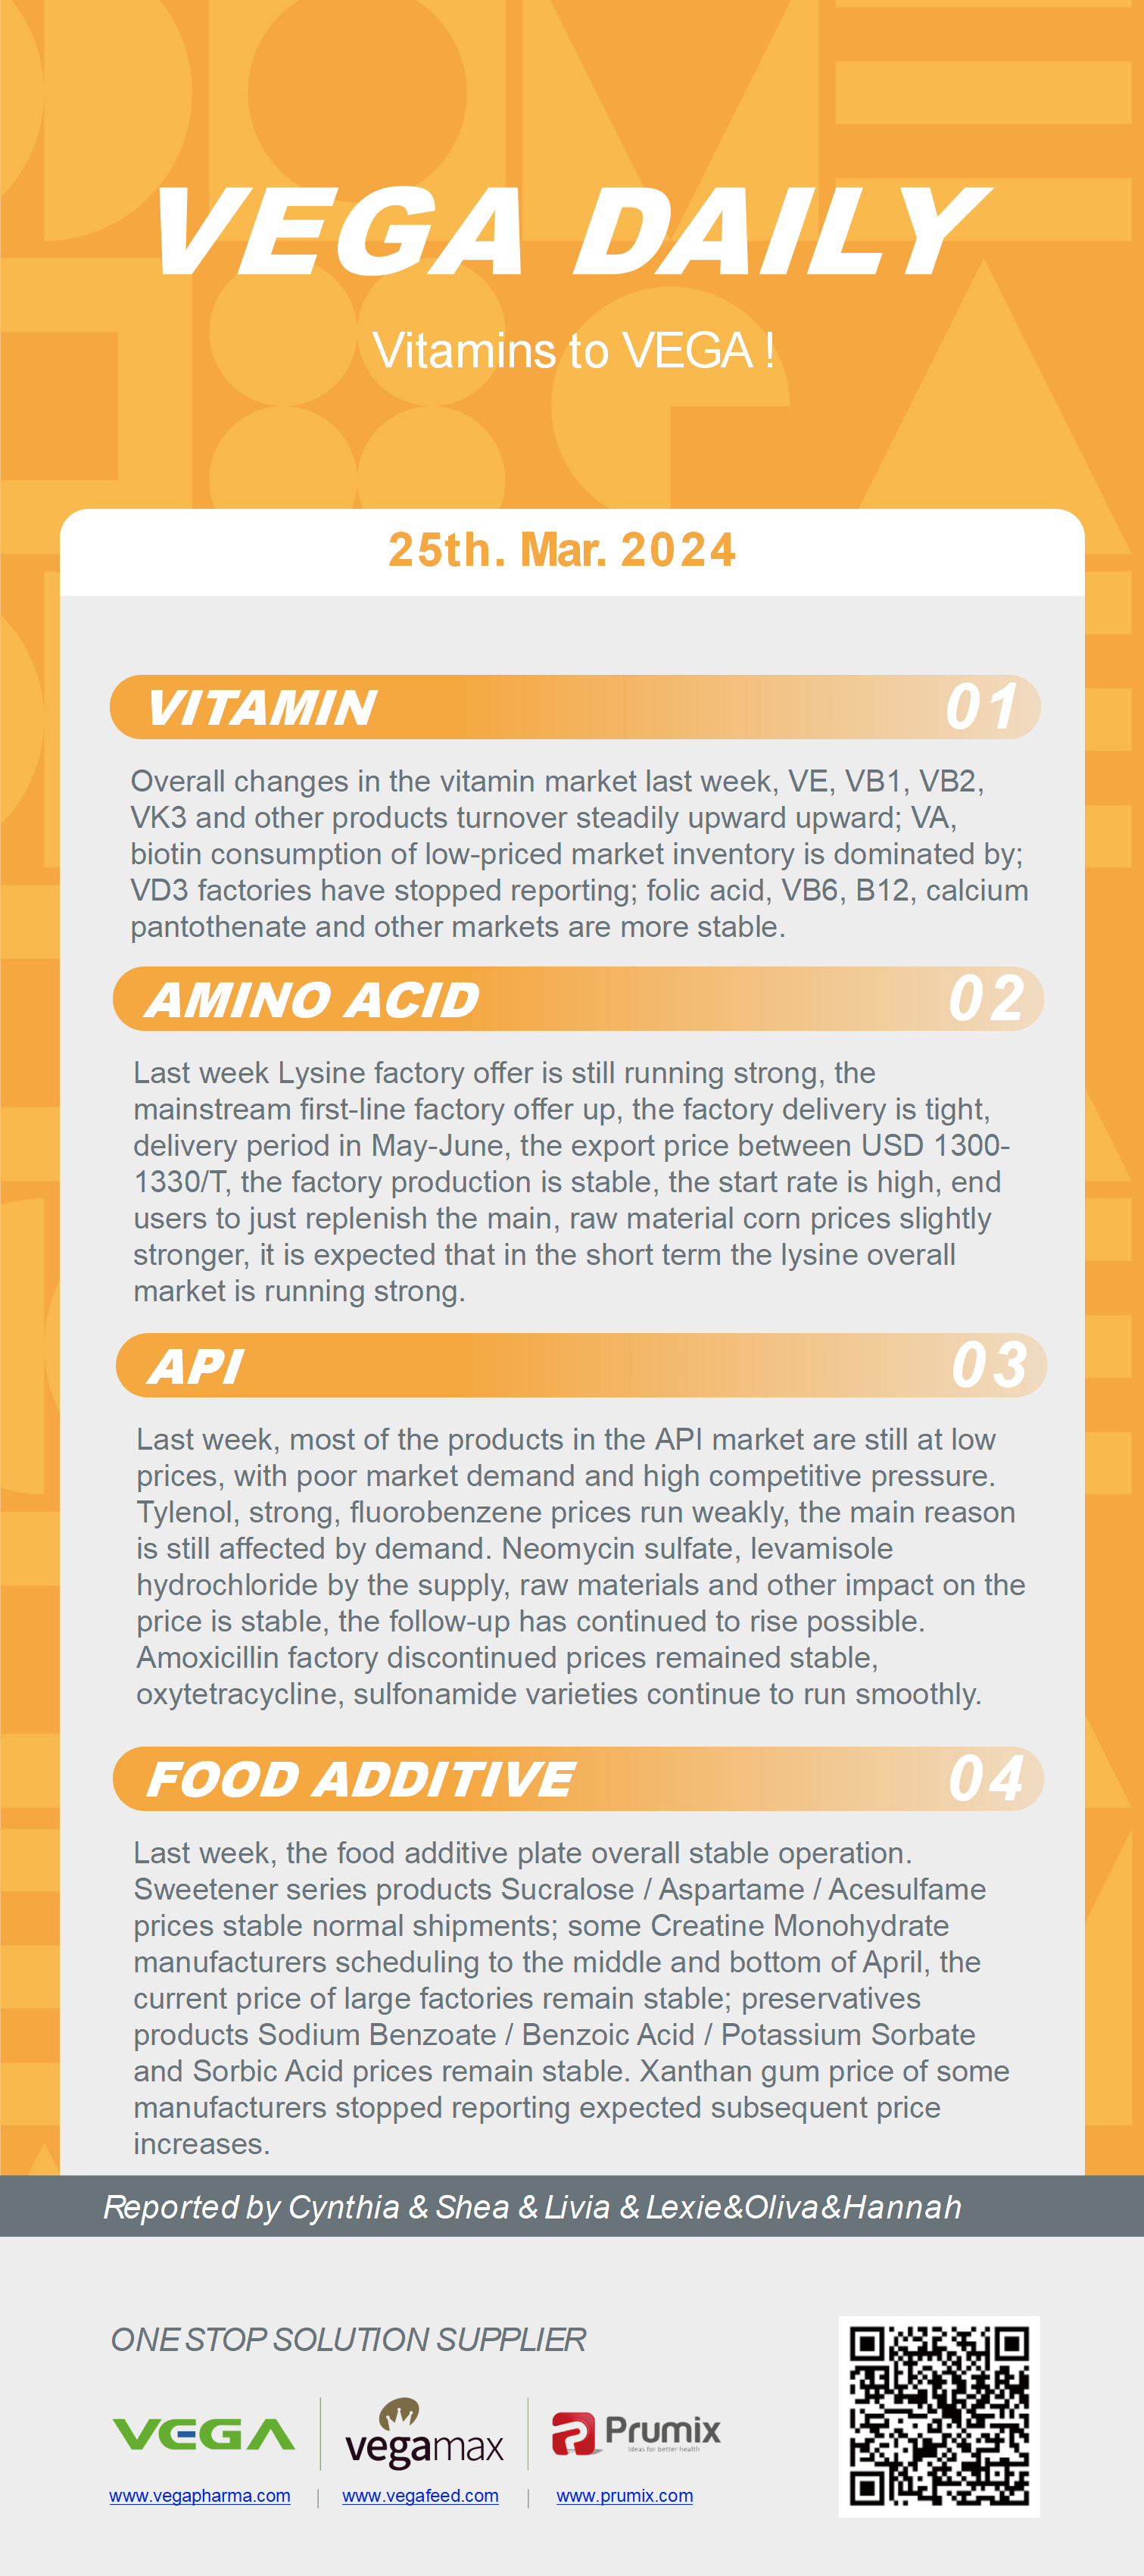 Vega Daily Dated on Mar 25th 2024 Vitamin Amino Acid APl Food Additives.png